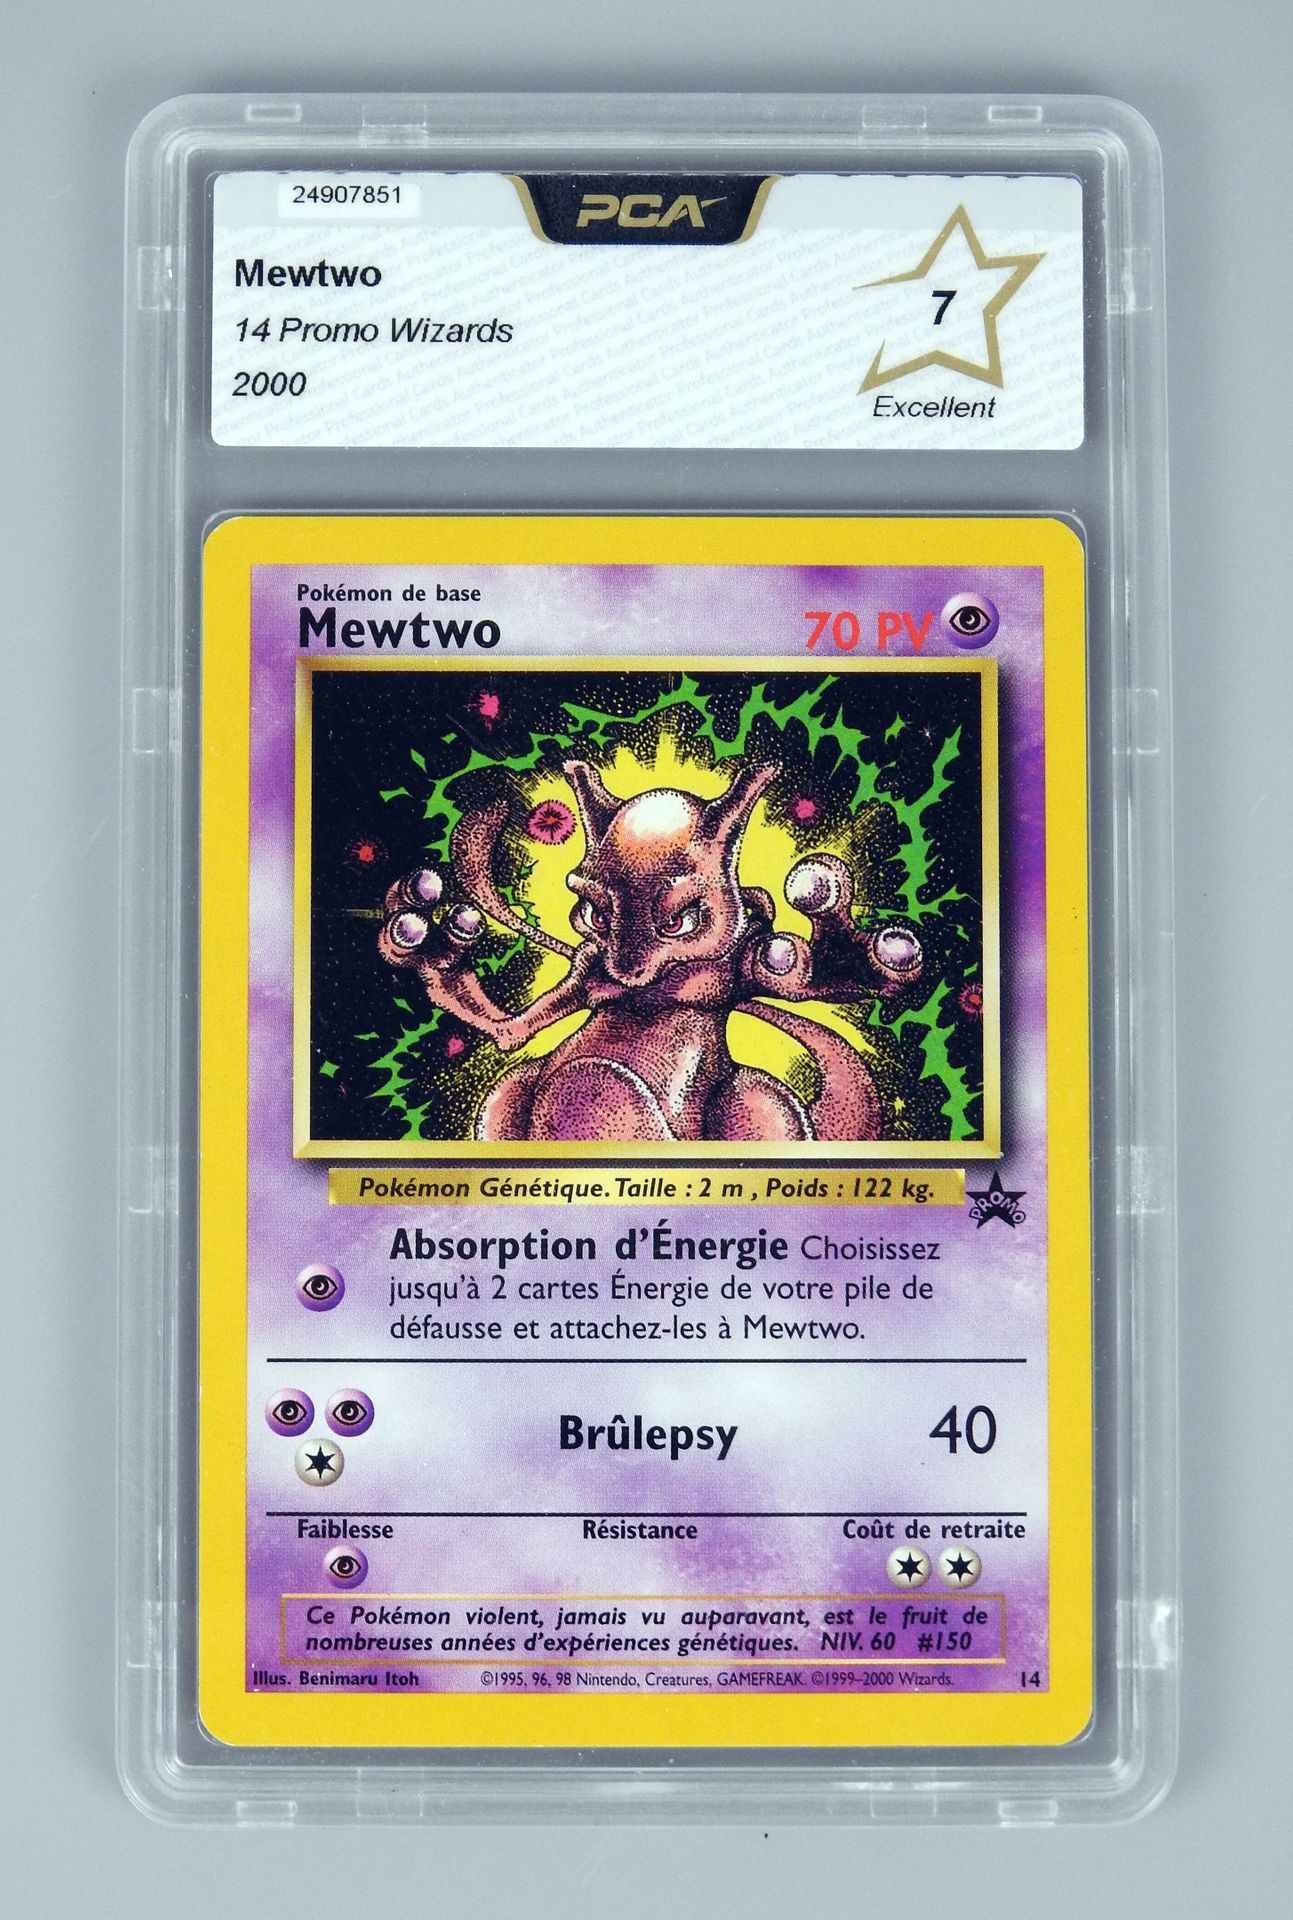 Null MEWTWO Promo

Wizards 14 Block

PCA 7 rated pokemon card